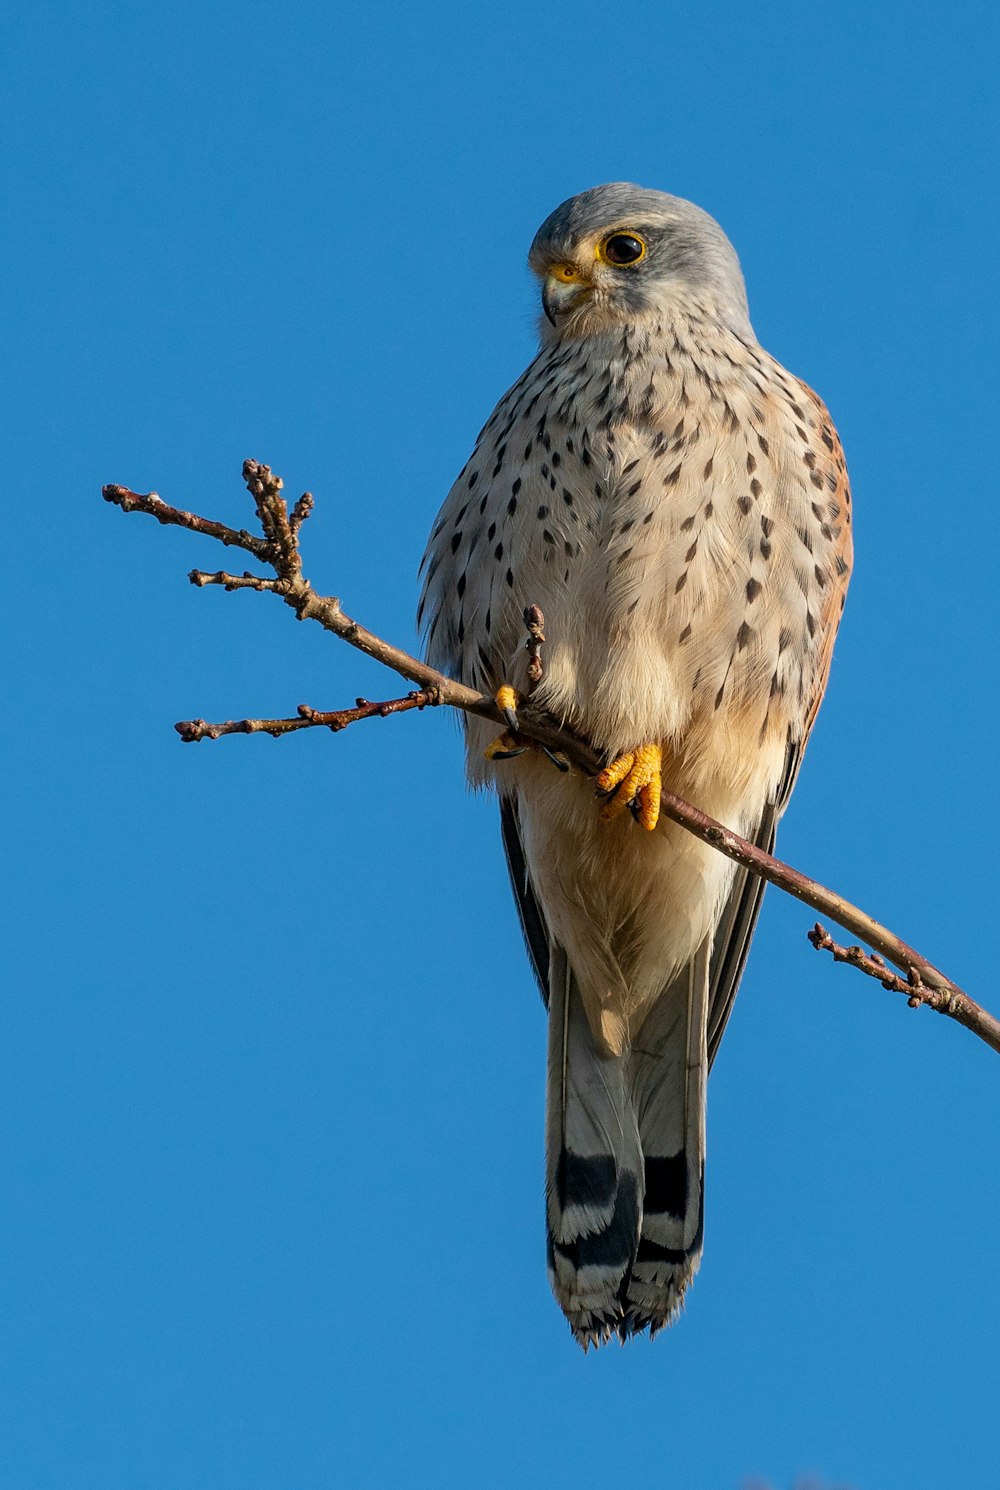 a bird perched on a branch with a blue sky in the background